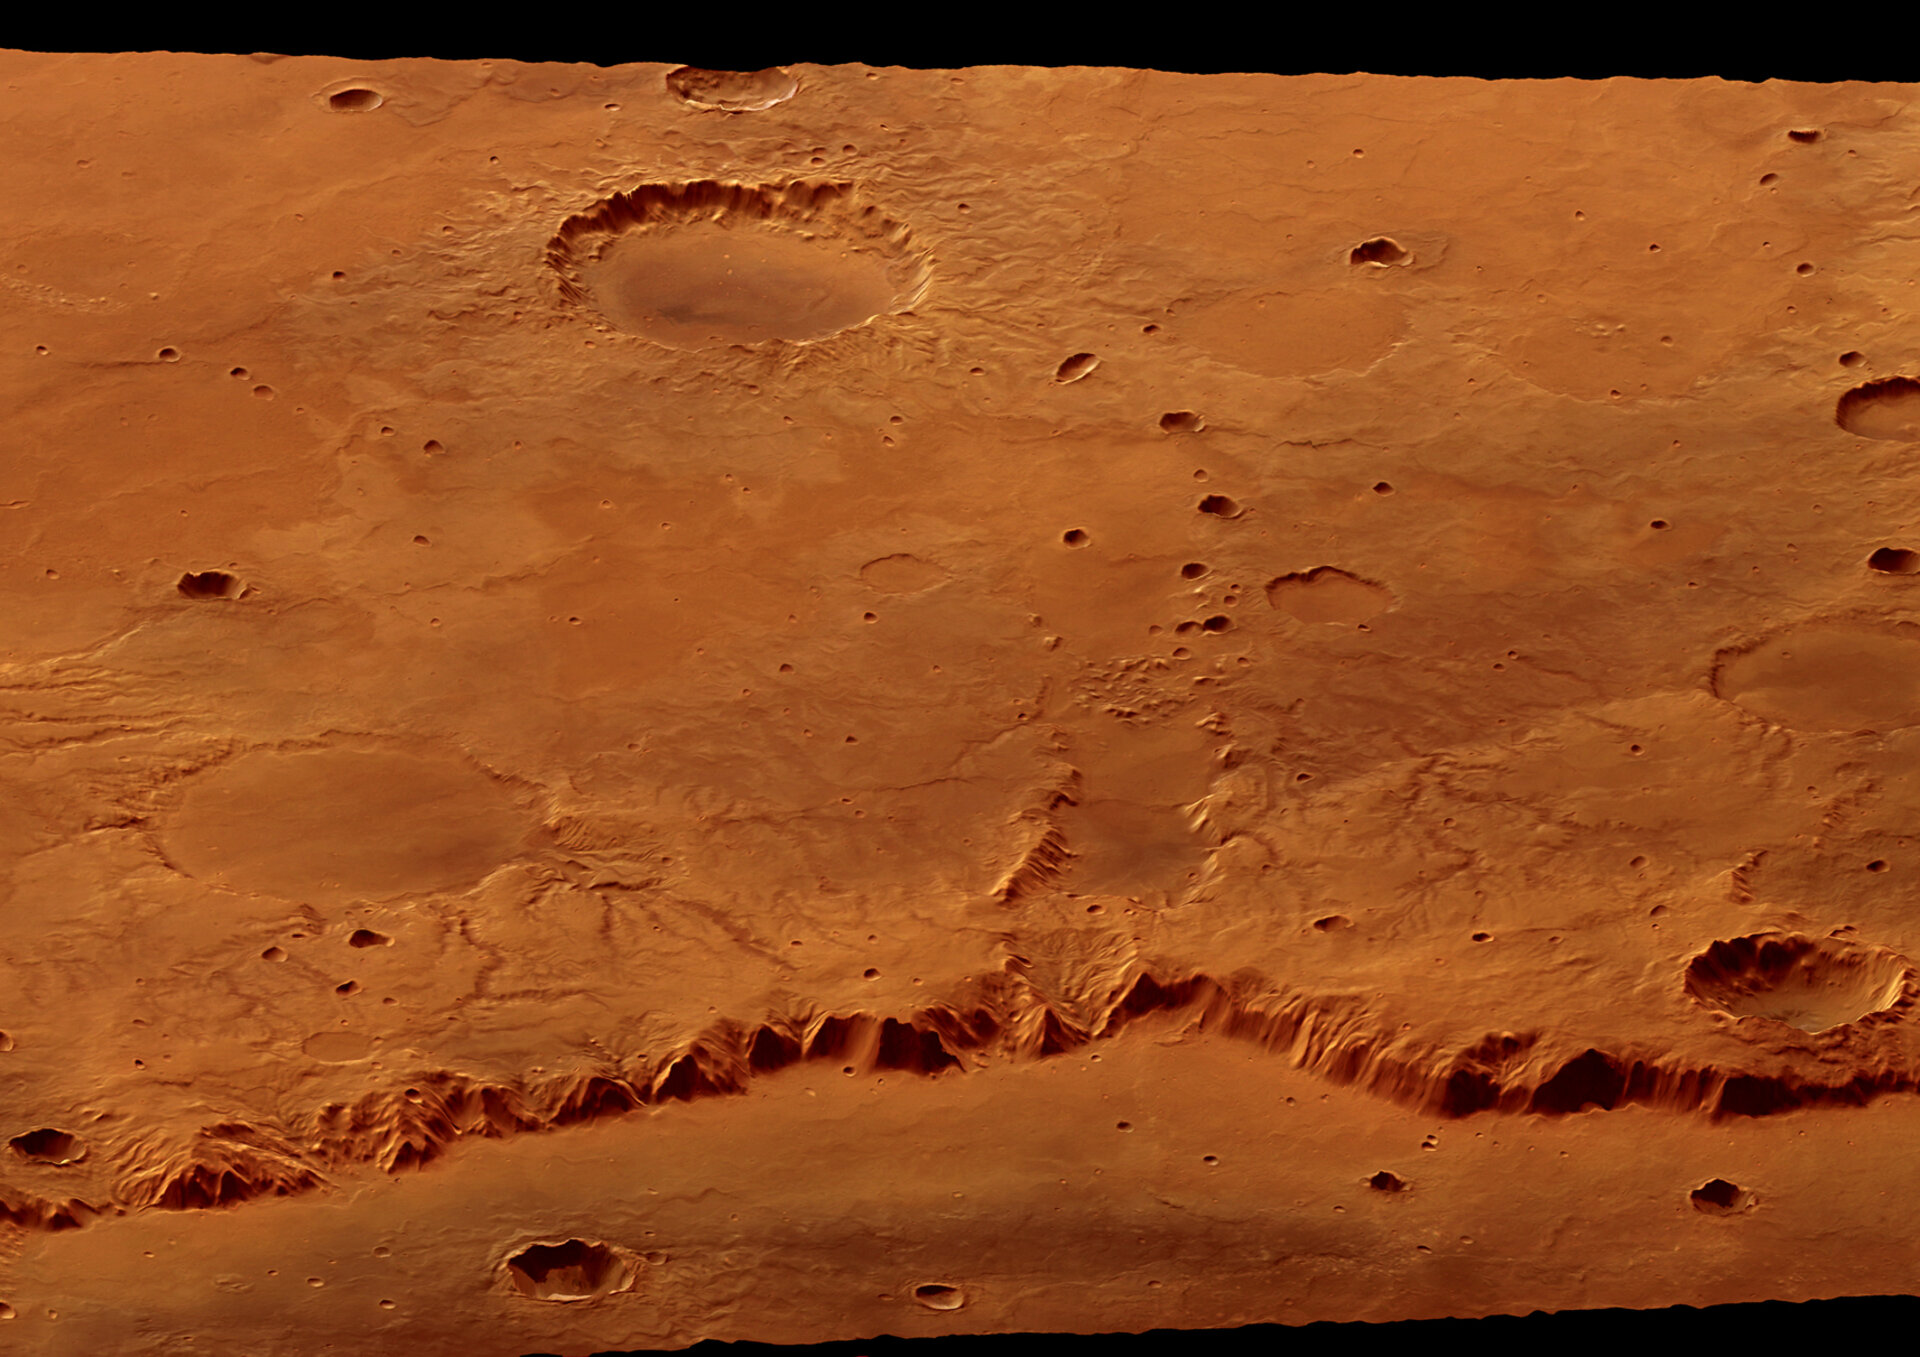 Rim of Crater Huygens, perspective view